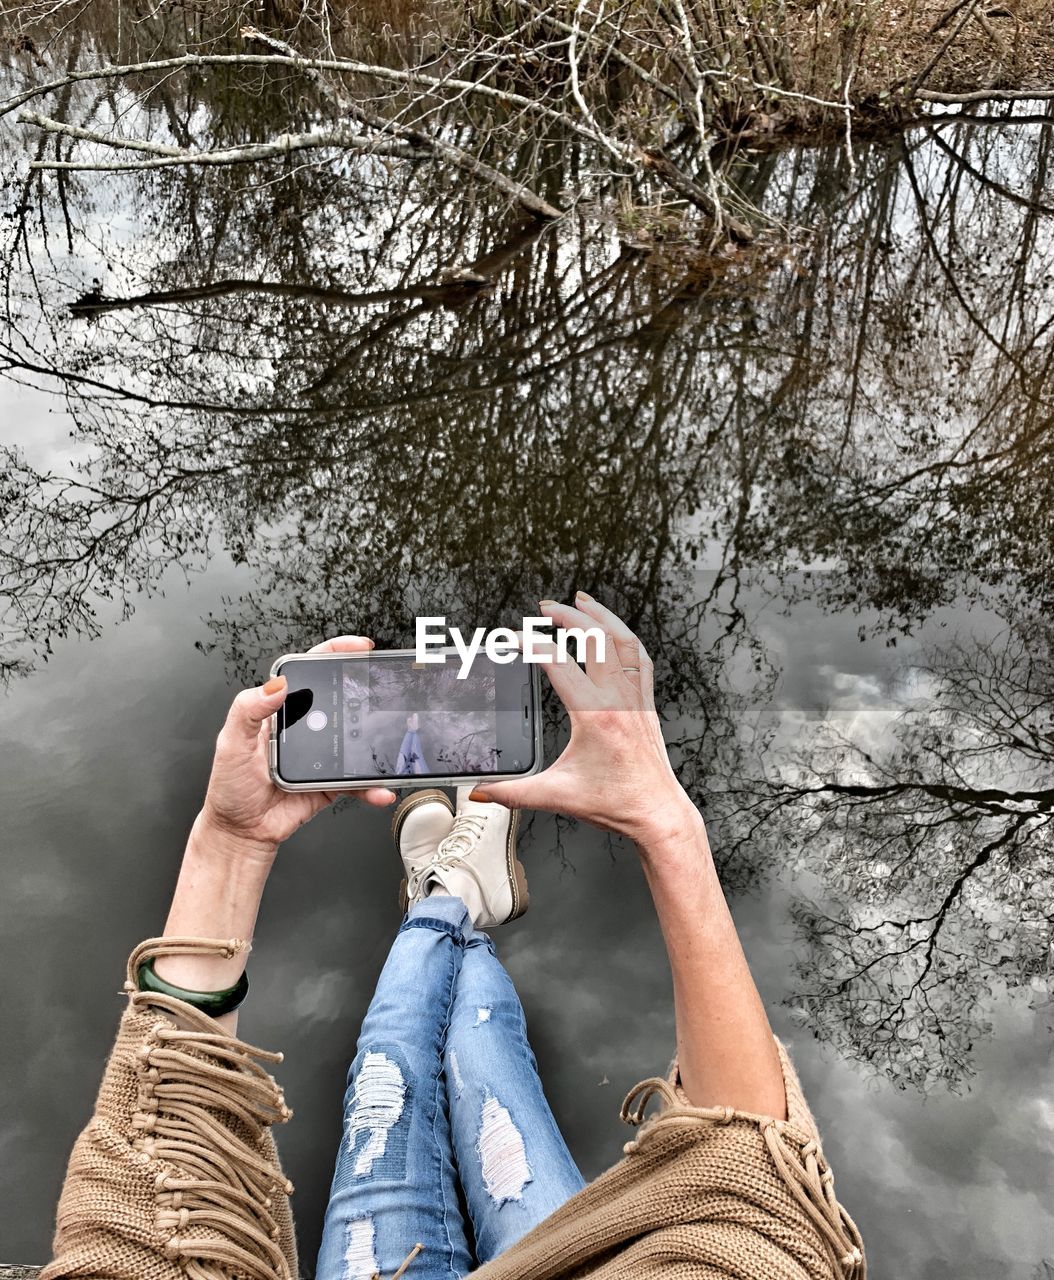 LOW SECTION OF PERSON PHOTOGRAPHING WITH MOBILE PHONE AGAINST TREES